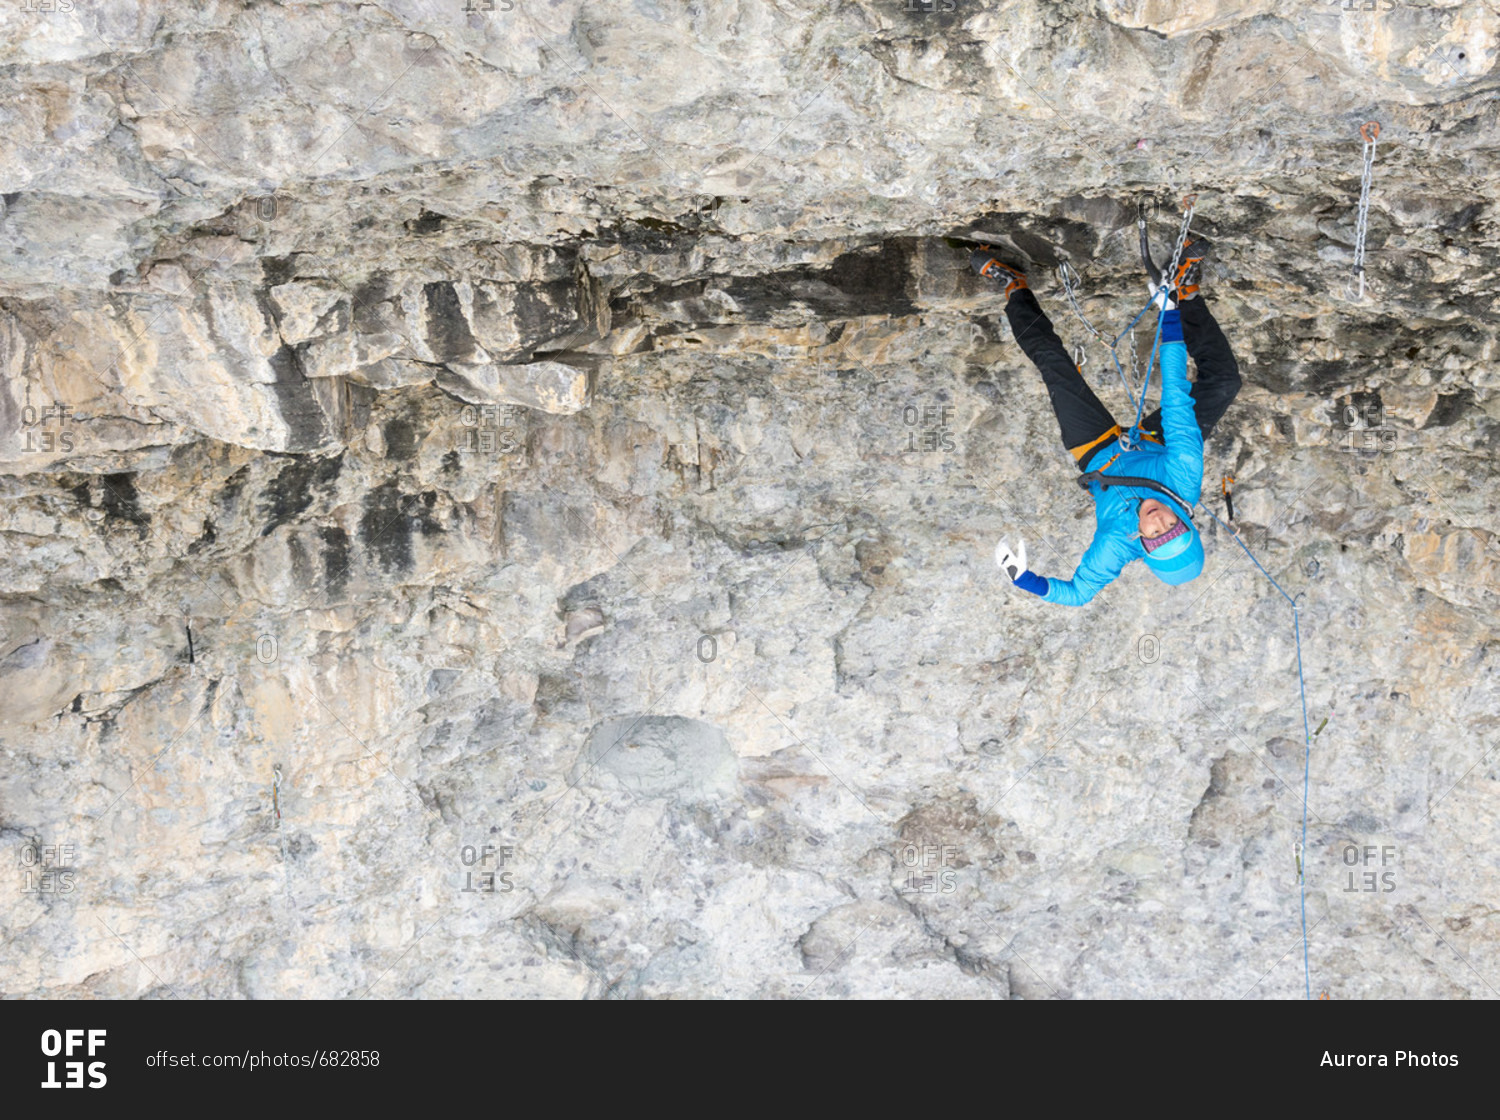 Woman rock climbing cave route called Zero to Hero at Hall of Justice cave, Camp Bird Road, Uncompahgre National Forest, Ouray, Colorado, USA